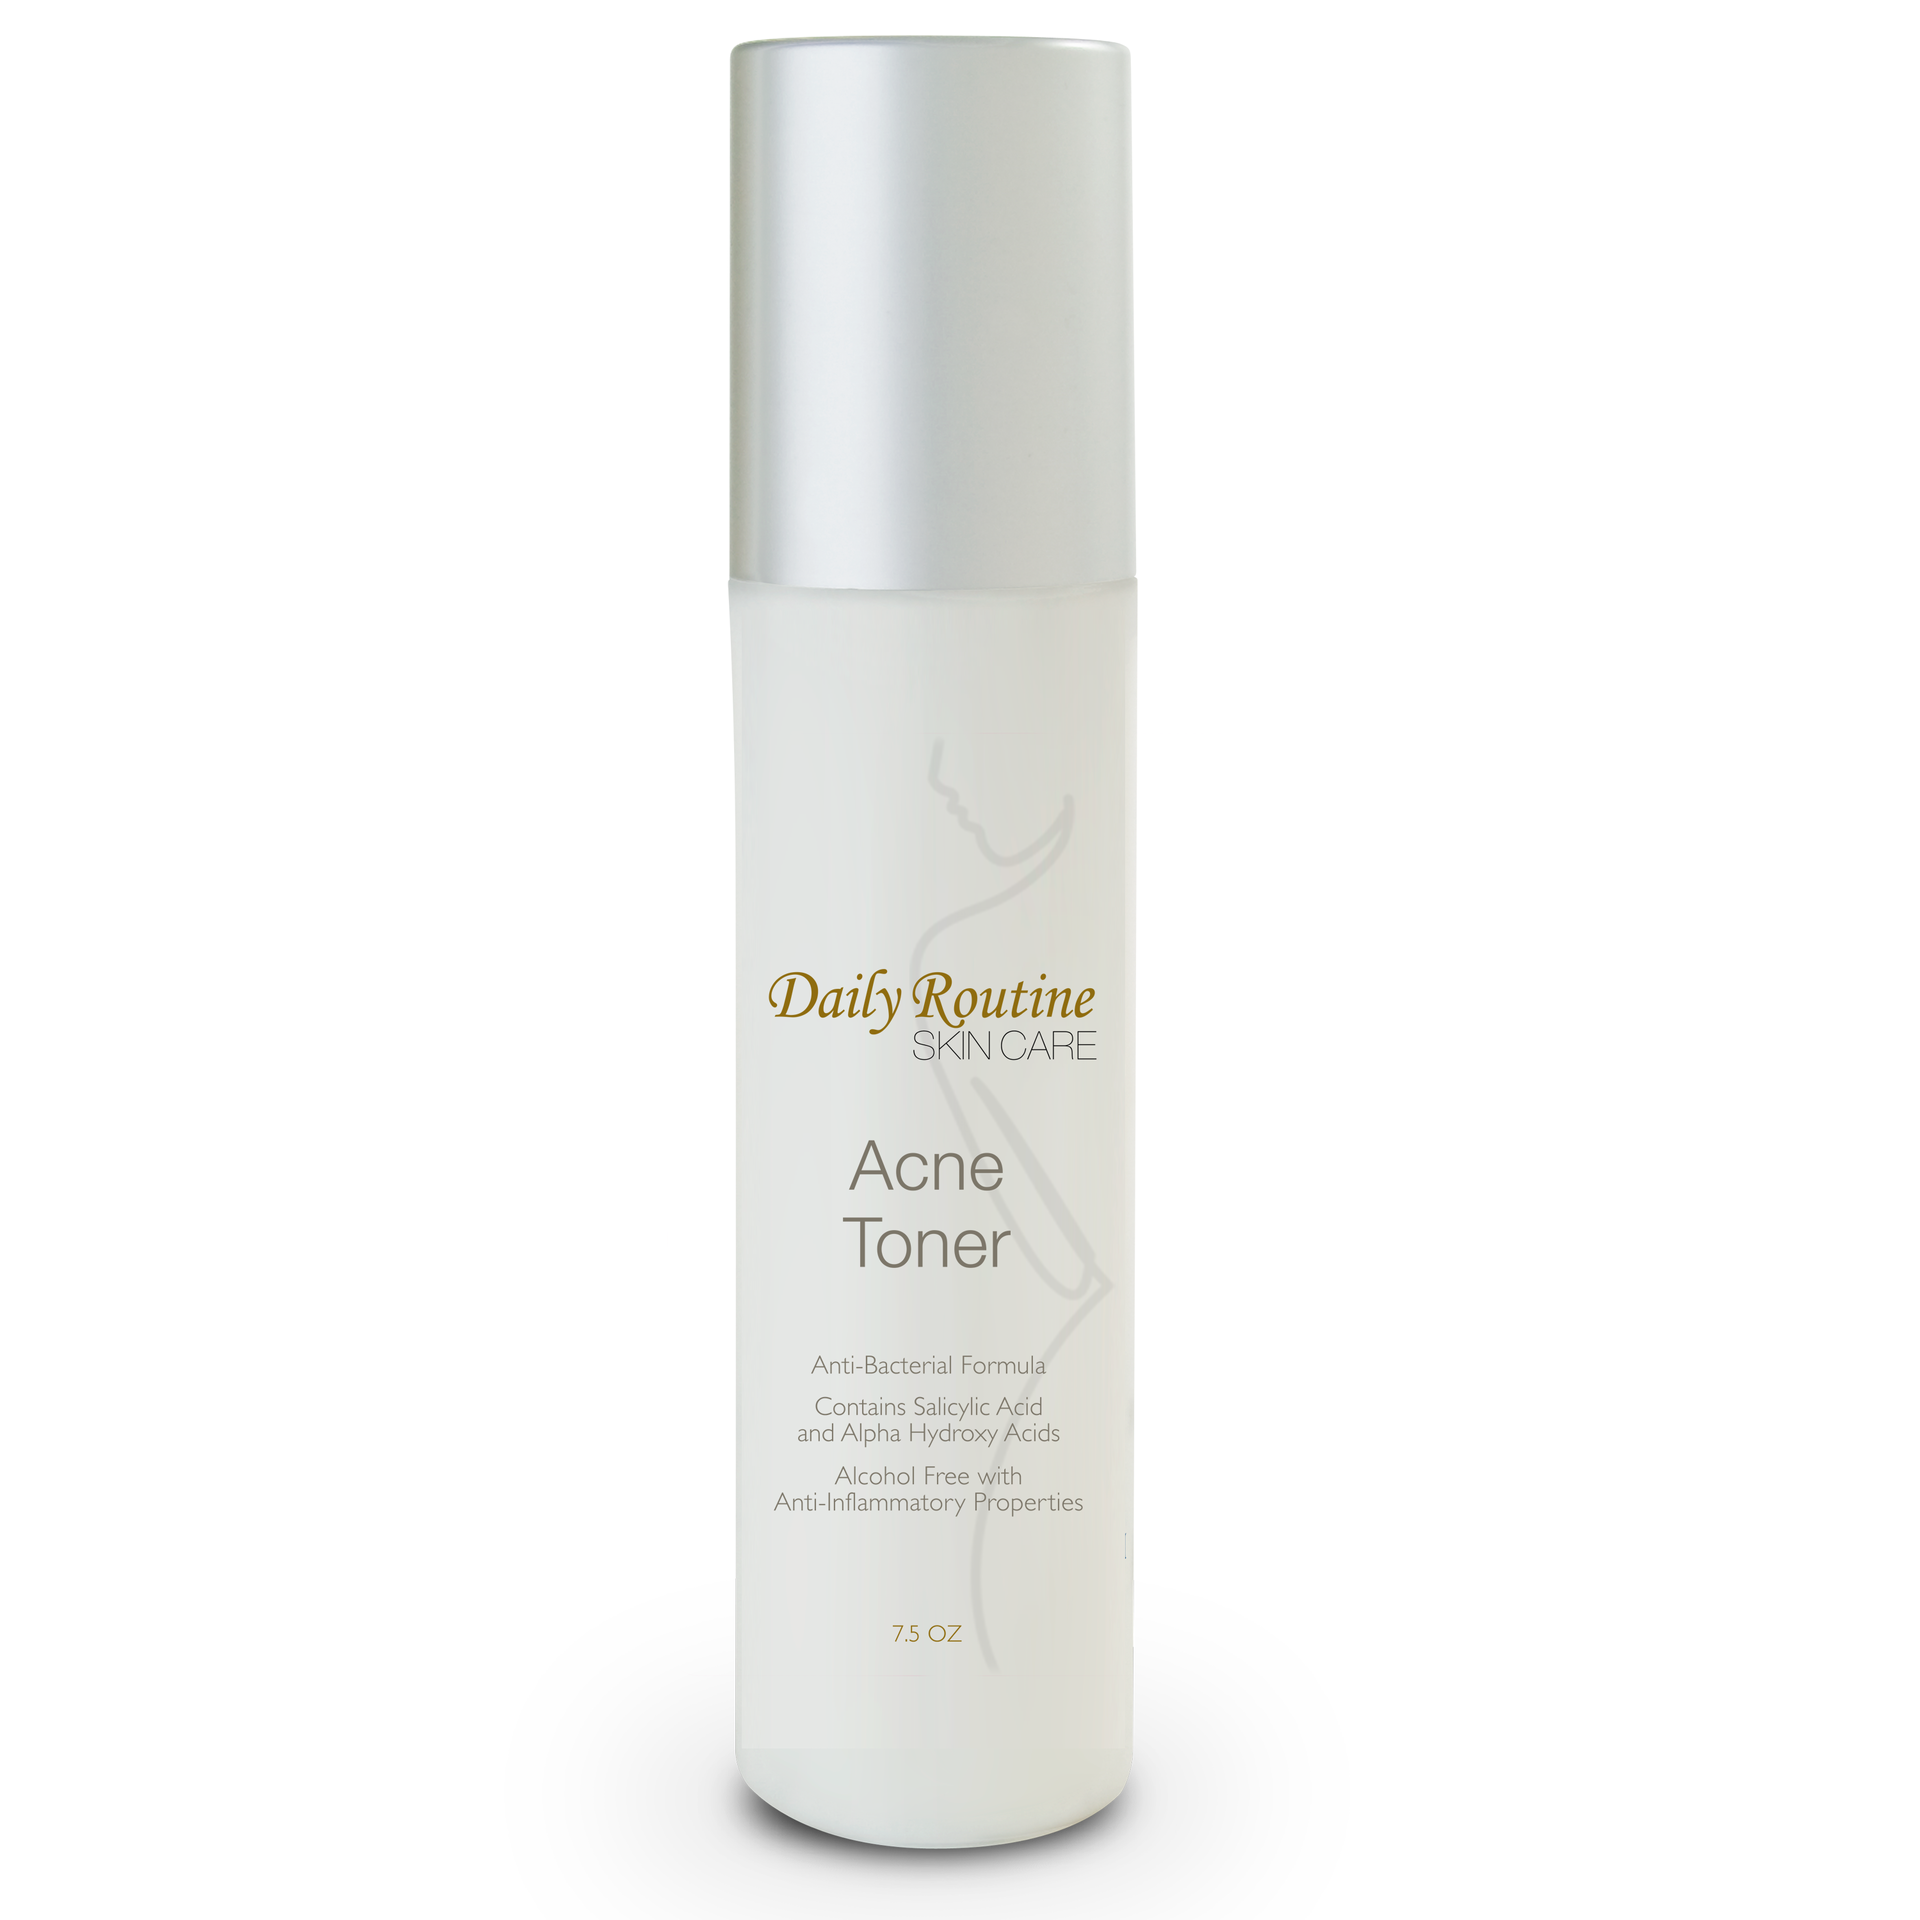 Acne Toner by Daily Routine Skin Care